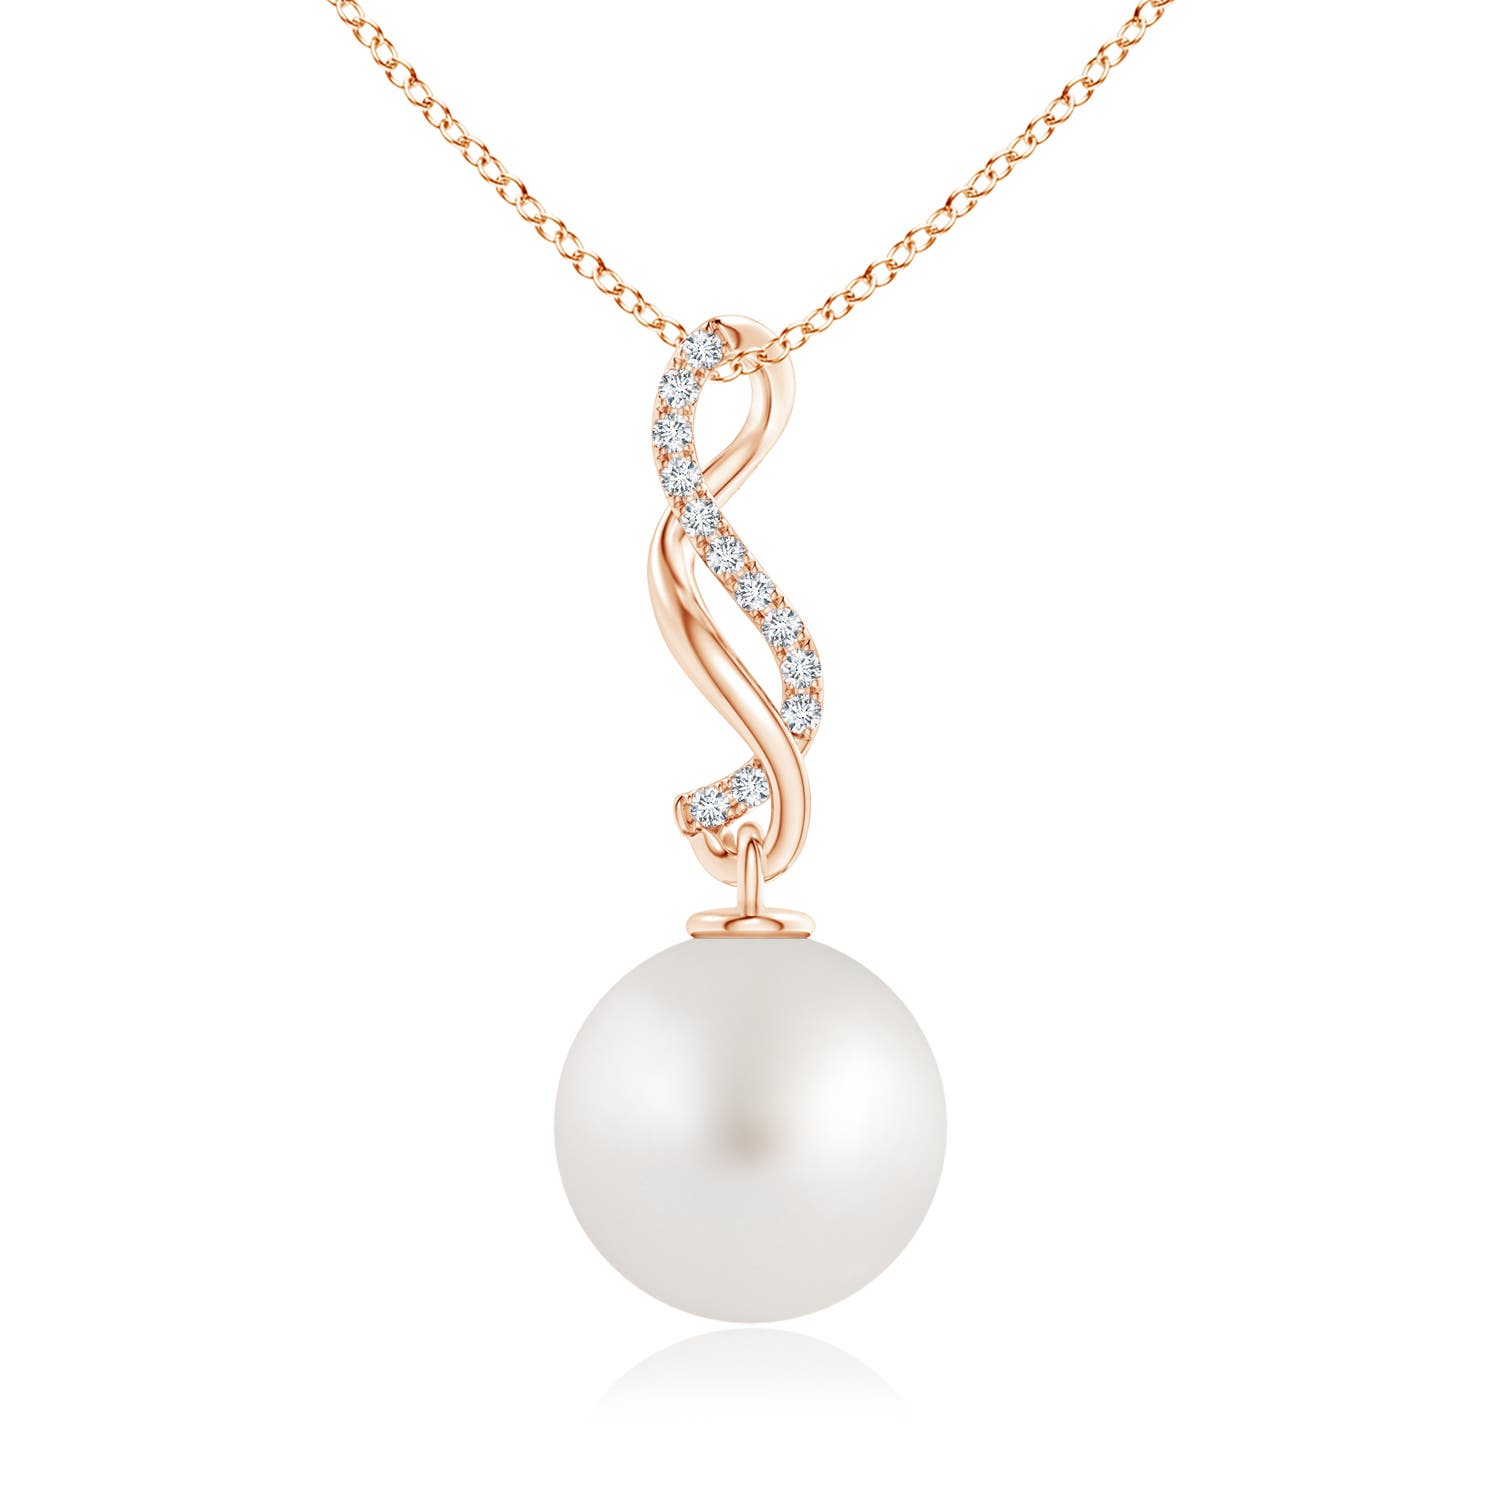 AA - South Sea Cultured Pearl / 7.26 CT / 14 KT Rose Gold